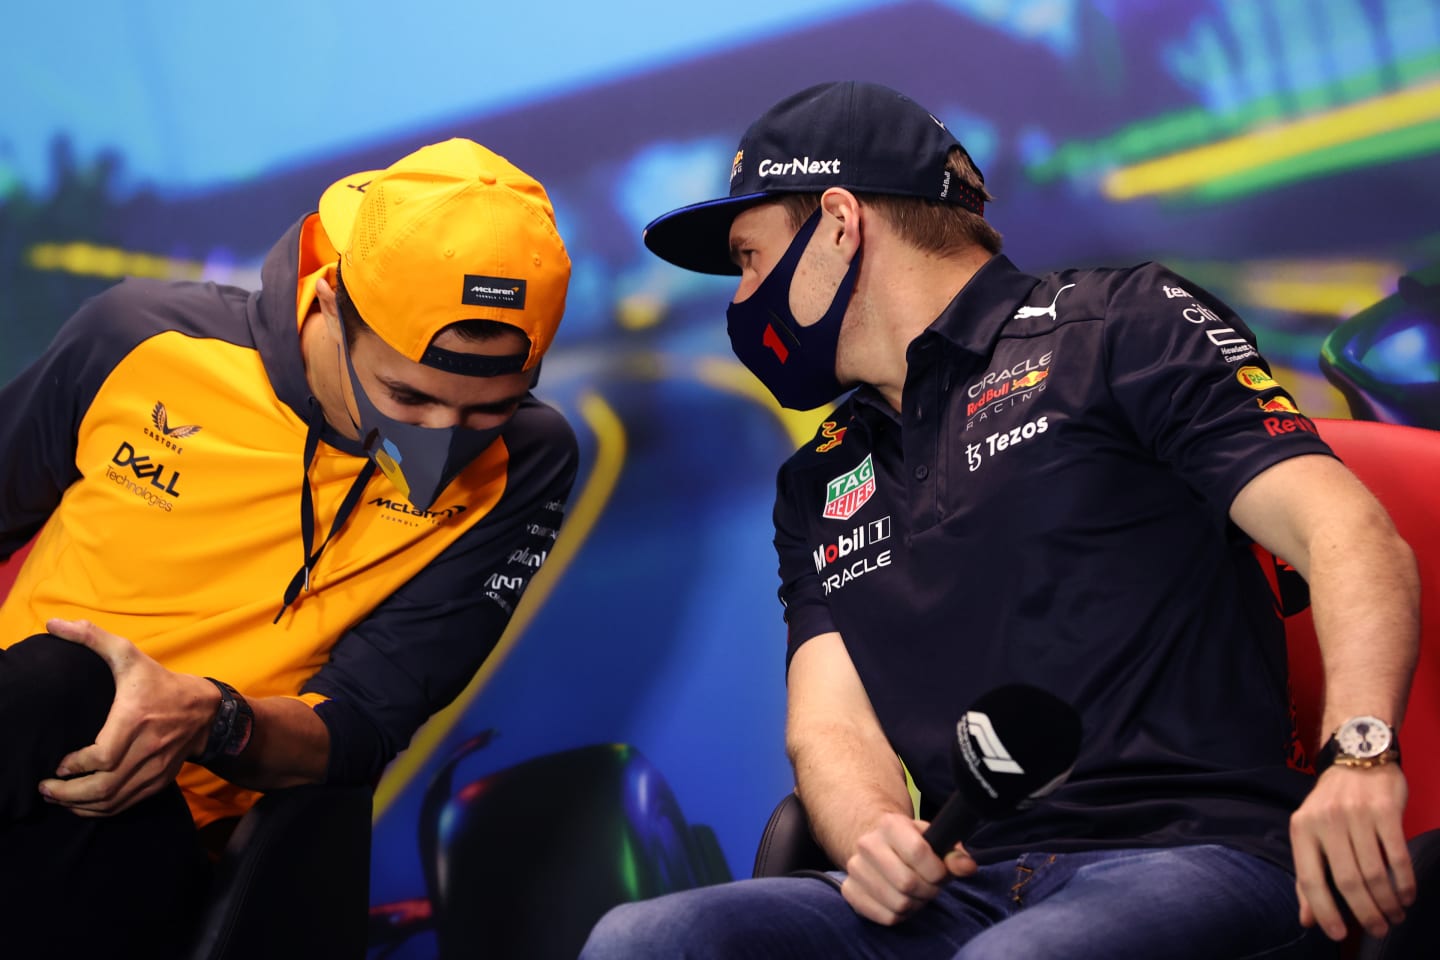 MELBOURNE, AUSTRALIA - APRIL 08: Max Verstappen of the Netherlands and Oracle Red Bull Racing talks with Lando Norris of Great Britain and McLaren in the Drivers Press Conference prior to practice ahead of the F1 Grand Prix of Australia at Melbourne Grand Prix Circuit on April 08, 2022 in Melbourne, Australia. (Photo by Robert Cianflone/Getty Images)